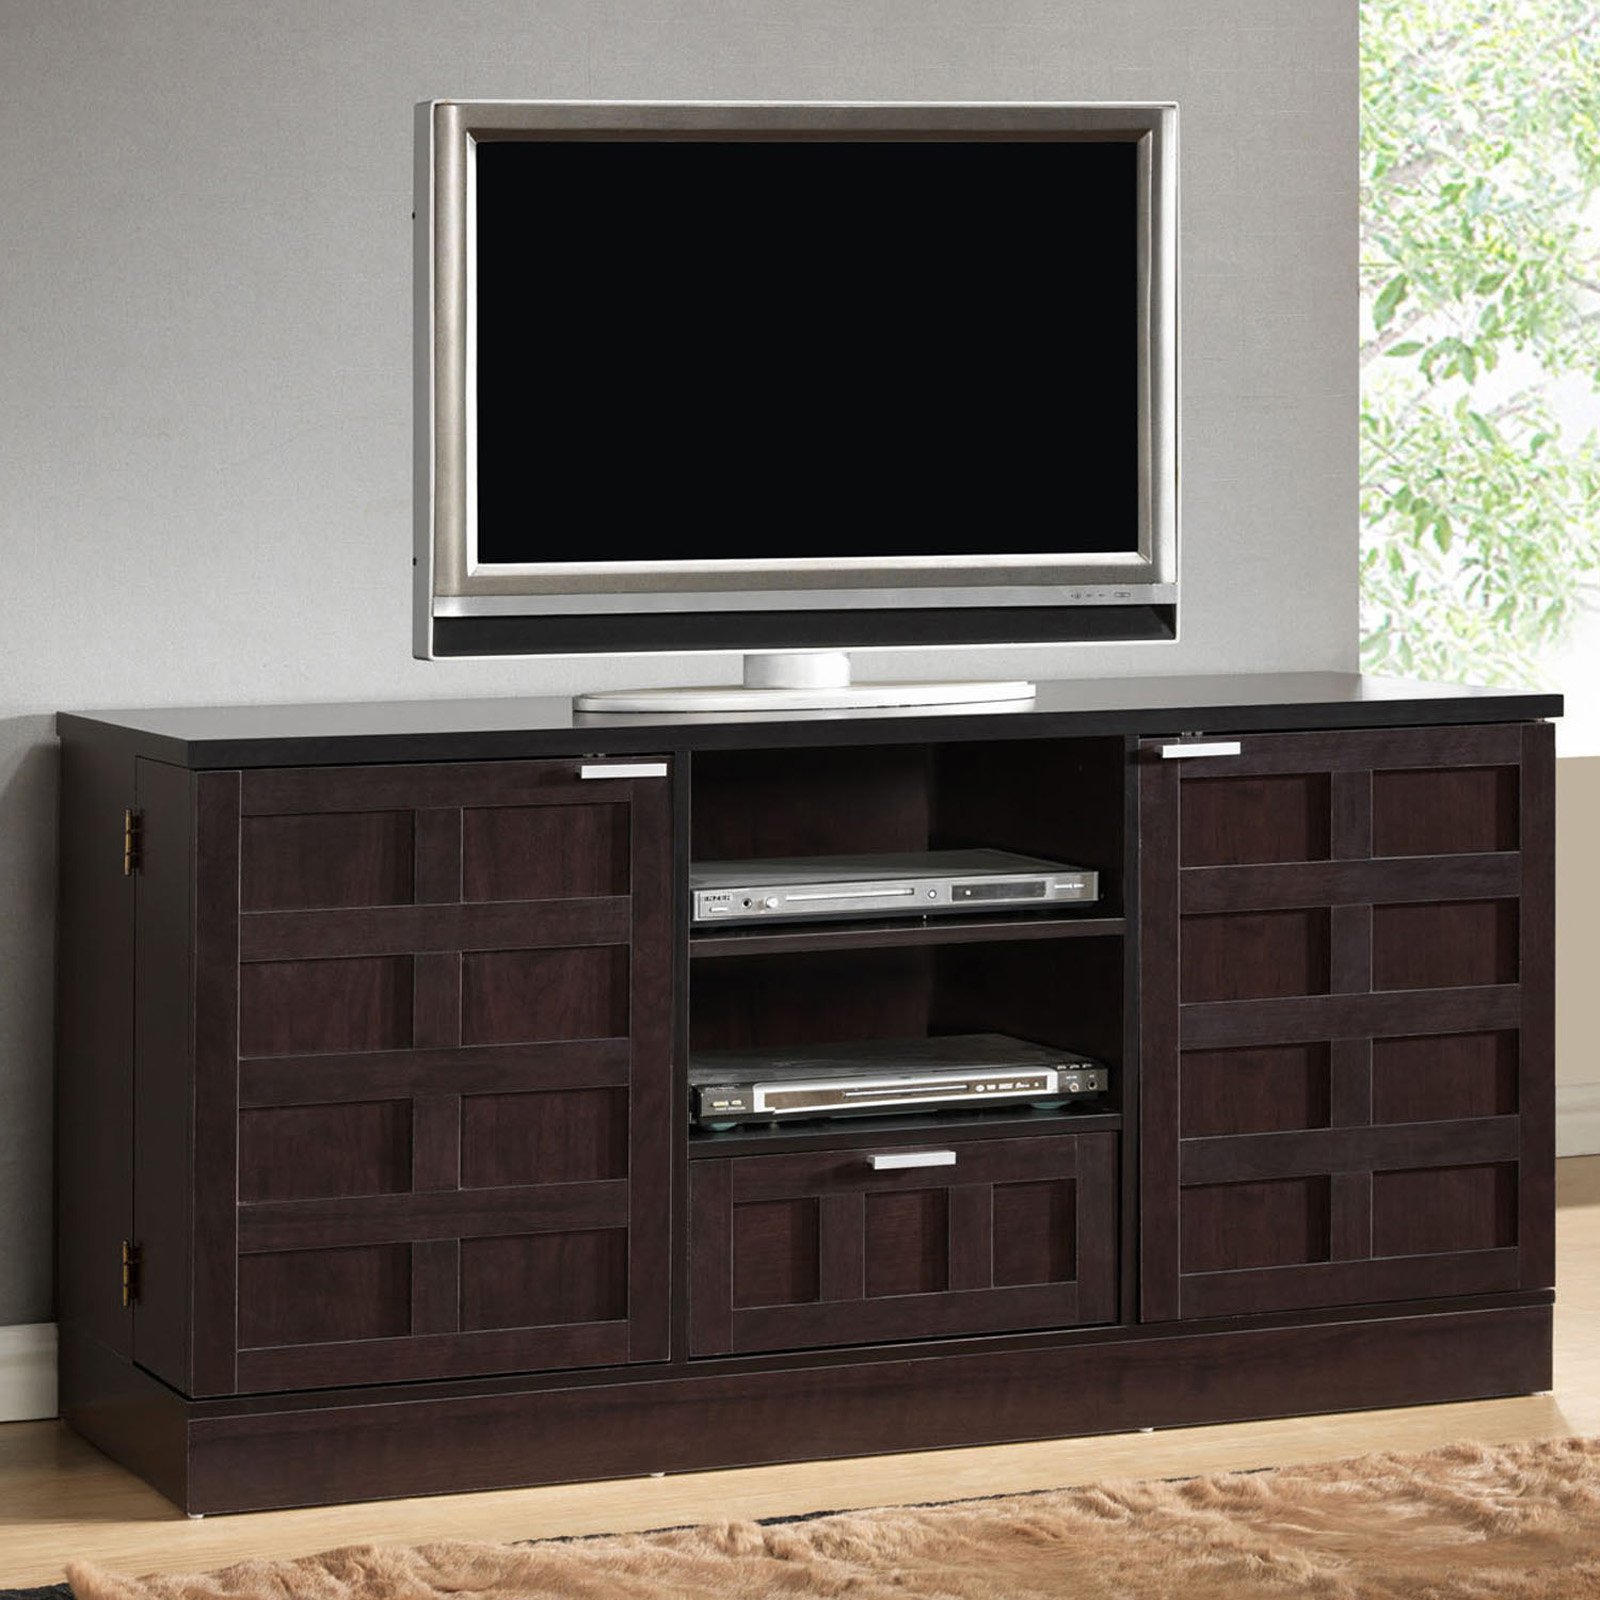 Sauder Tv Stand with Fireplace Best Of tosato Modern Tv Stand and Media Cabinet Brown – Baxton